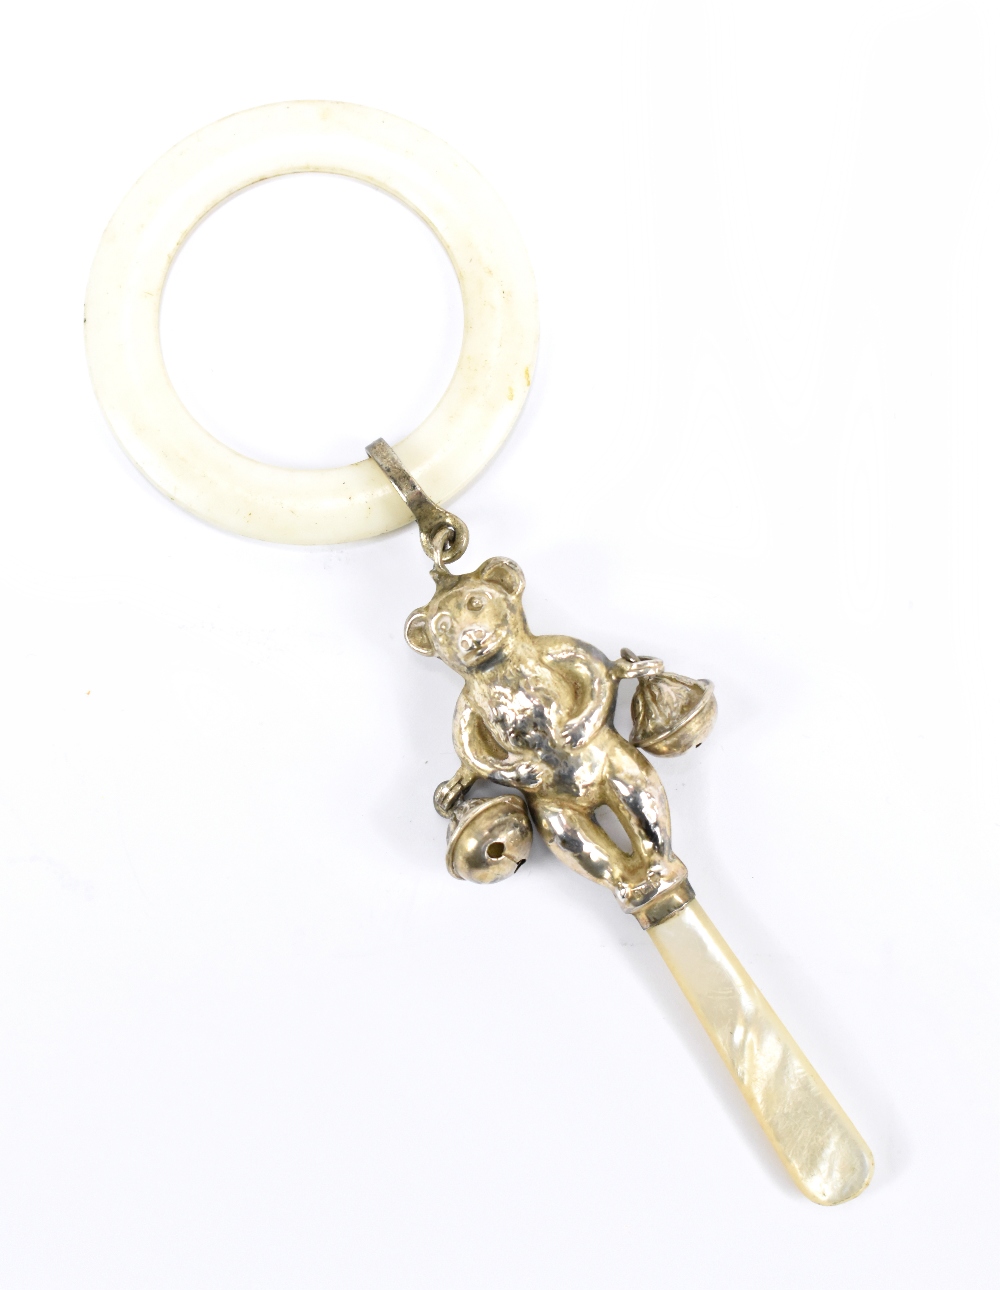 CRISFORD & NORRIS LTD; a George VI hallmarked silver child's rattle modelled as a double sided